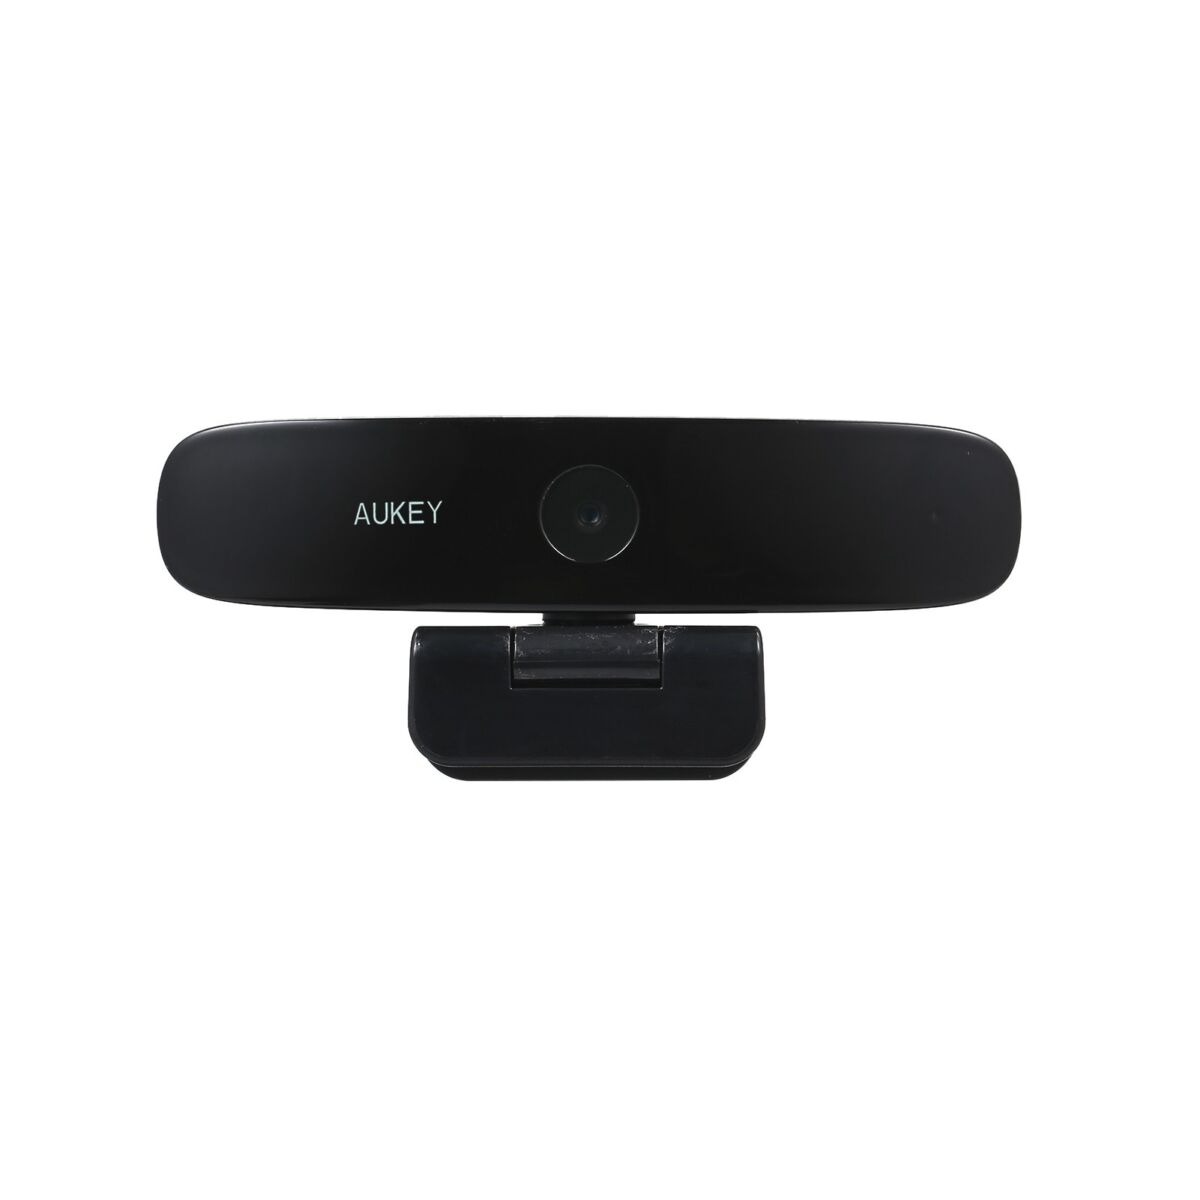 AUKEY Smart Full HD Webcam, 1080p Webcam with Dual-Mic